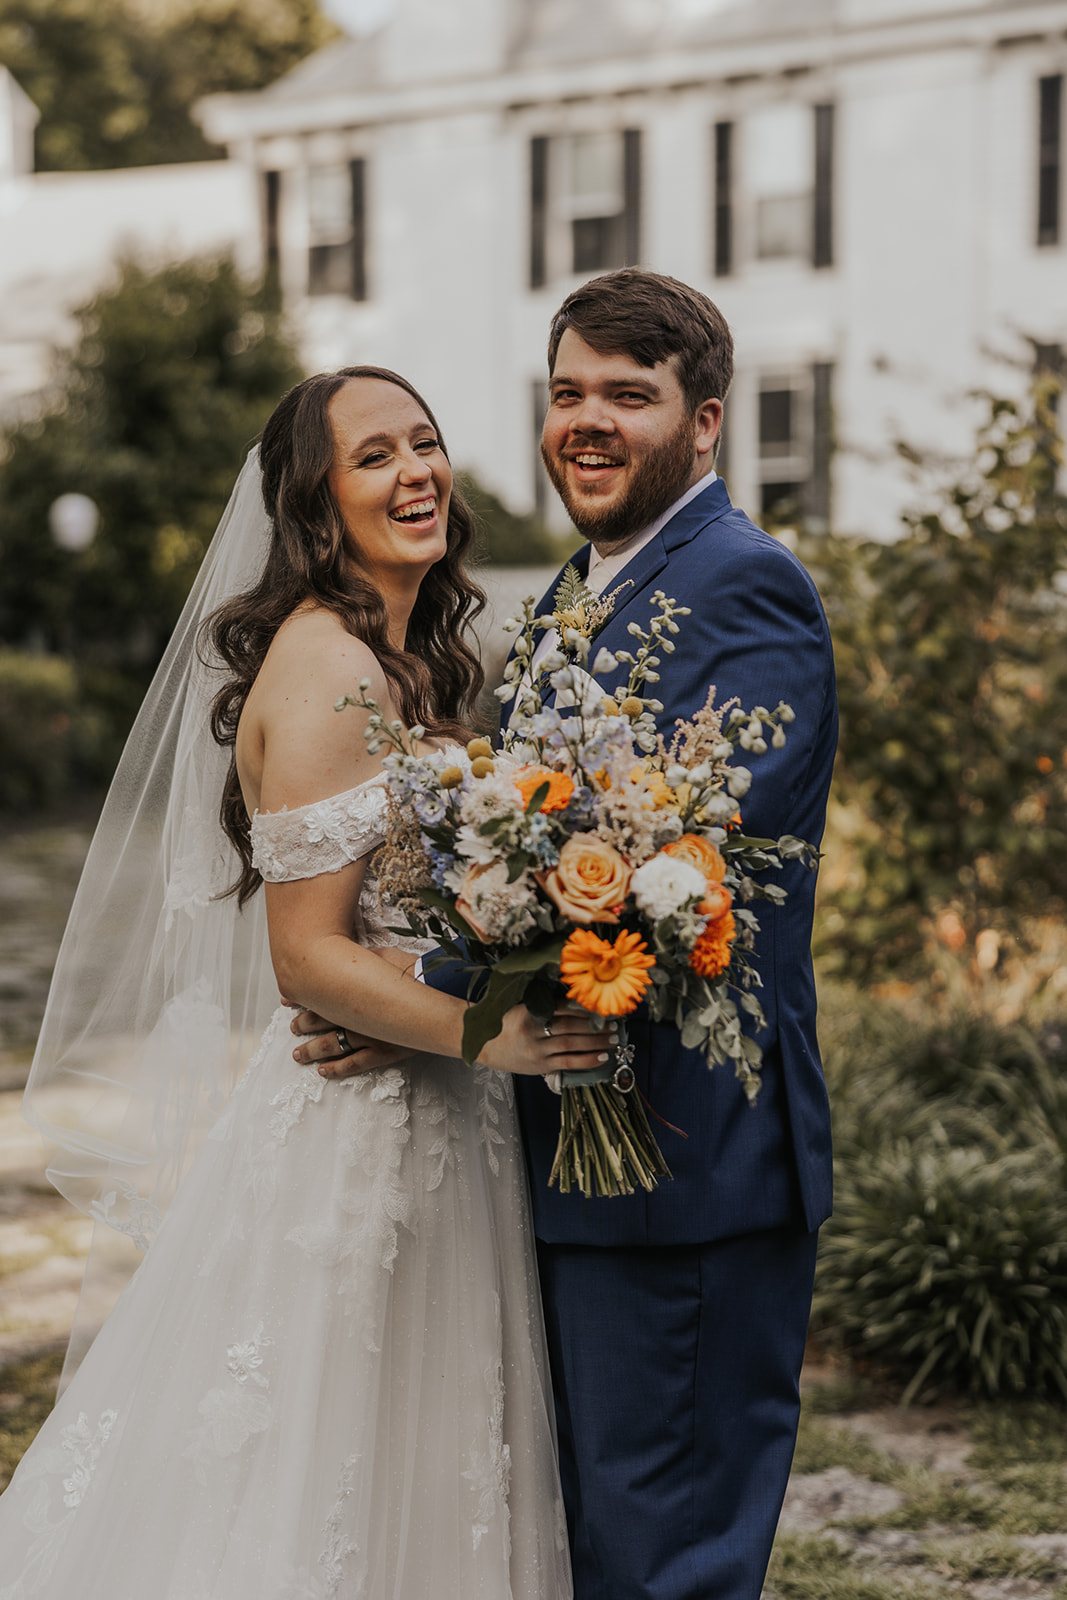 Stunning bride and groom pose for a photo outside Wildflower 301 in Georgia